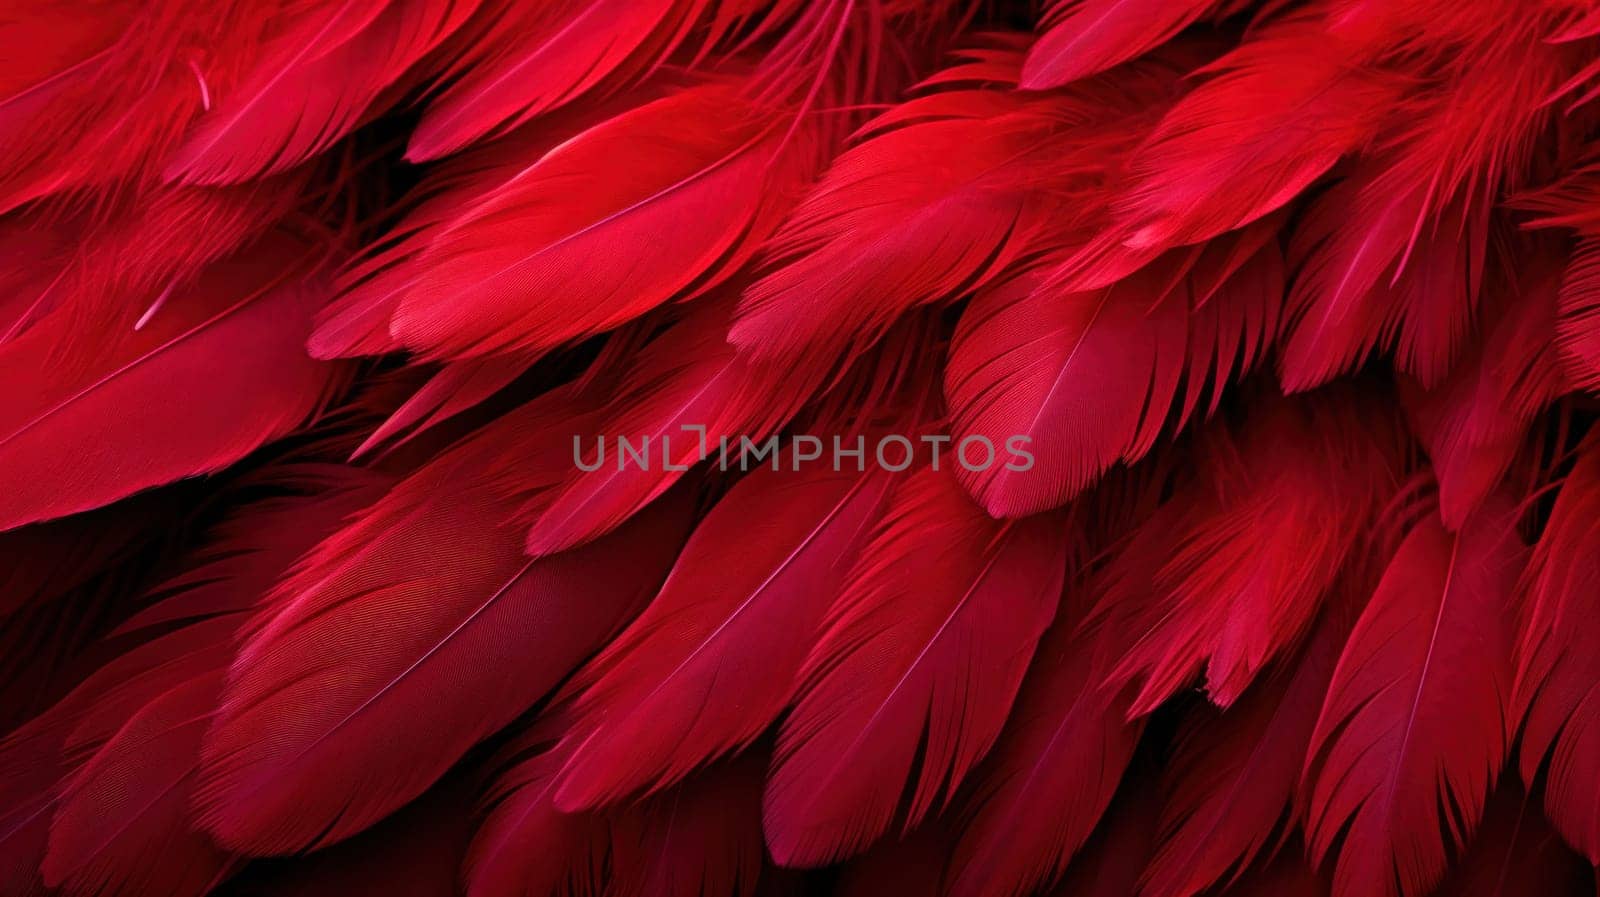 A close up of a large group of red feathers